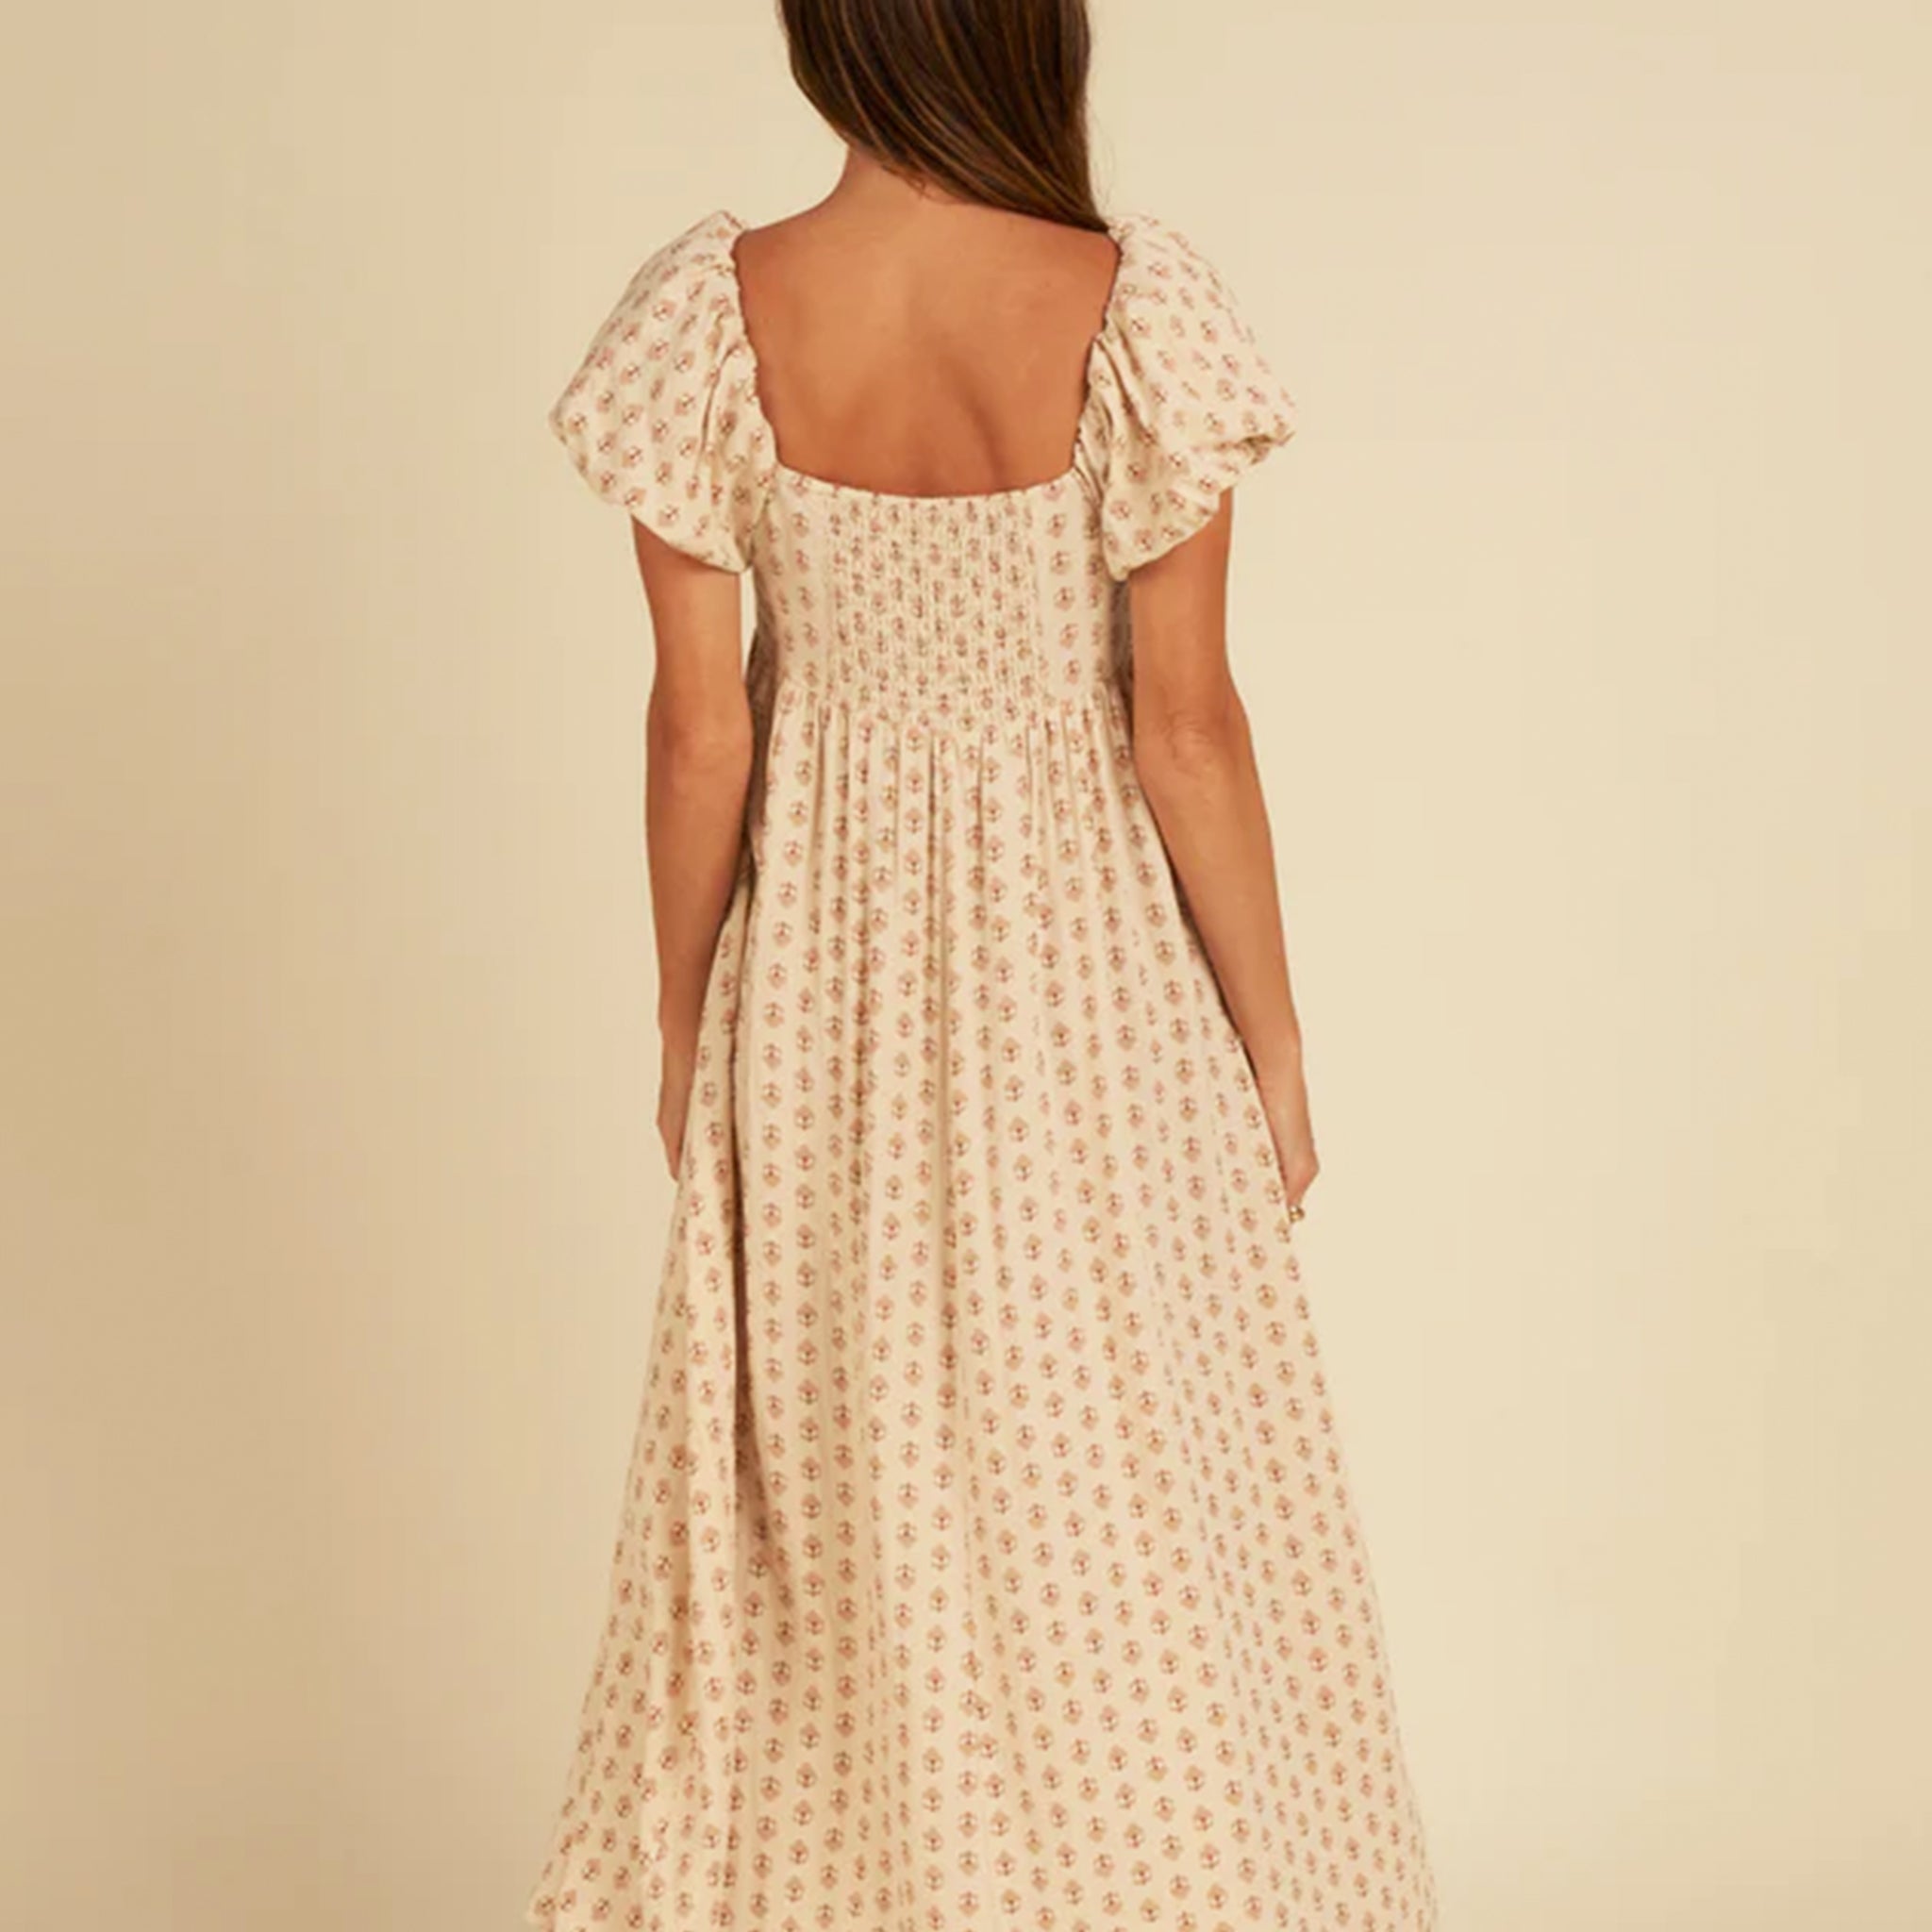 A neutral colored vintage floral print maxi dress with a square neckline and puffy short sleeves.